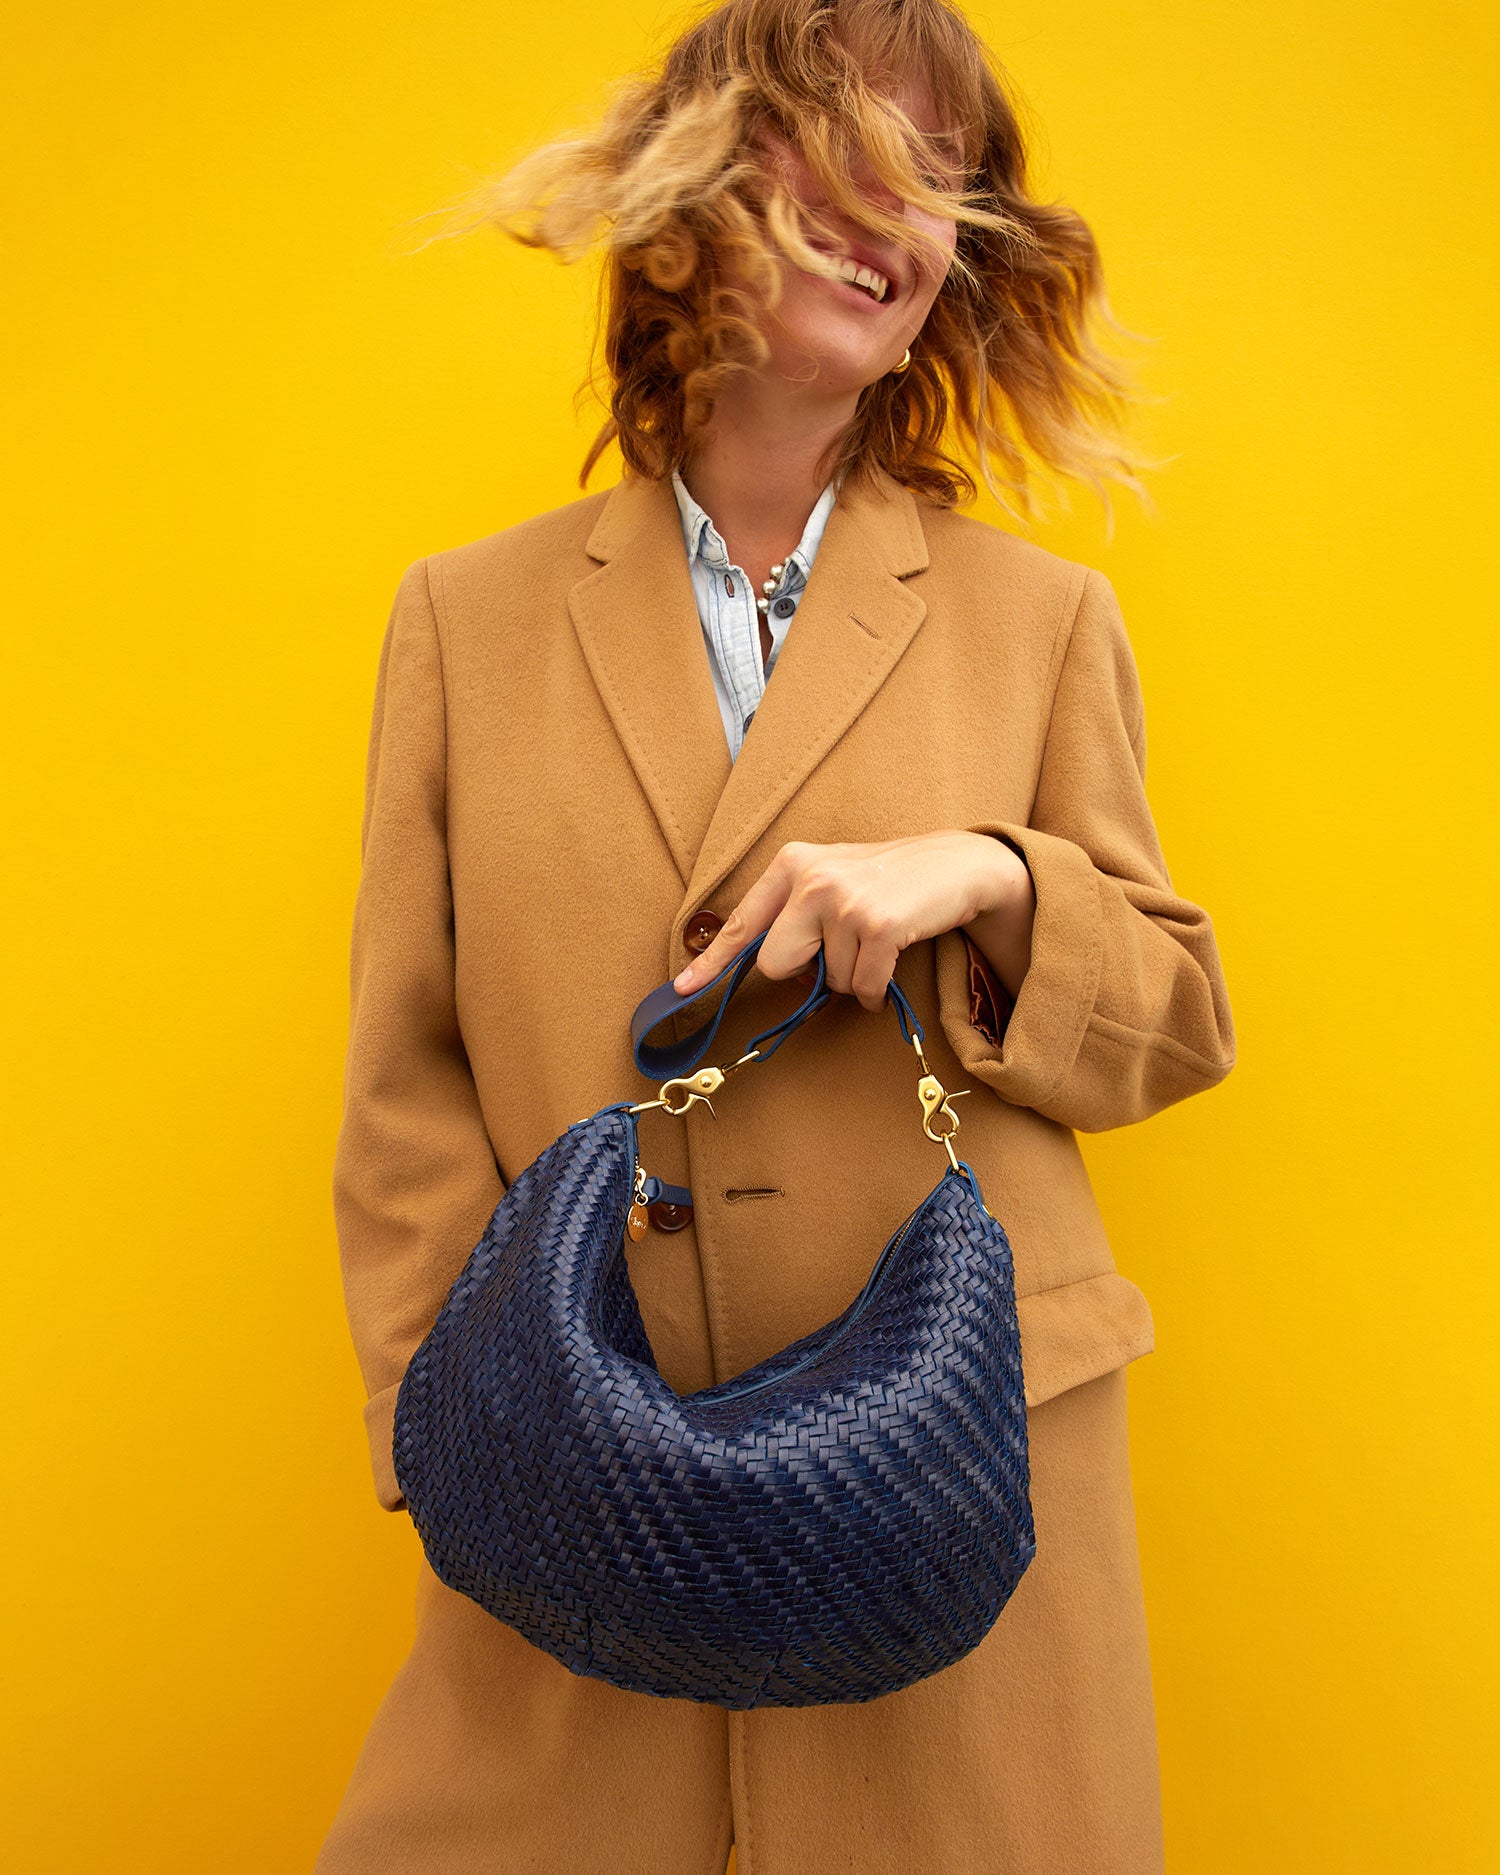 Lou holding the Pacific Woven Zig Zag Moyen Messenger by its shoulder strap